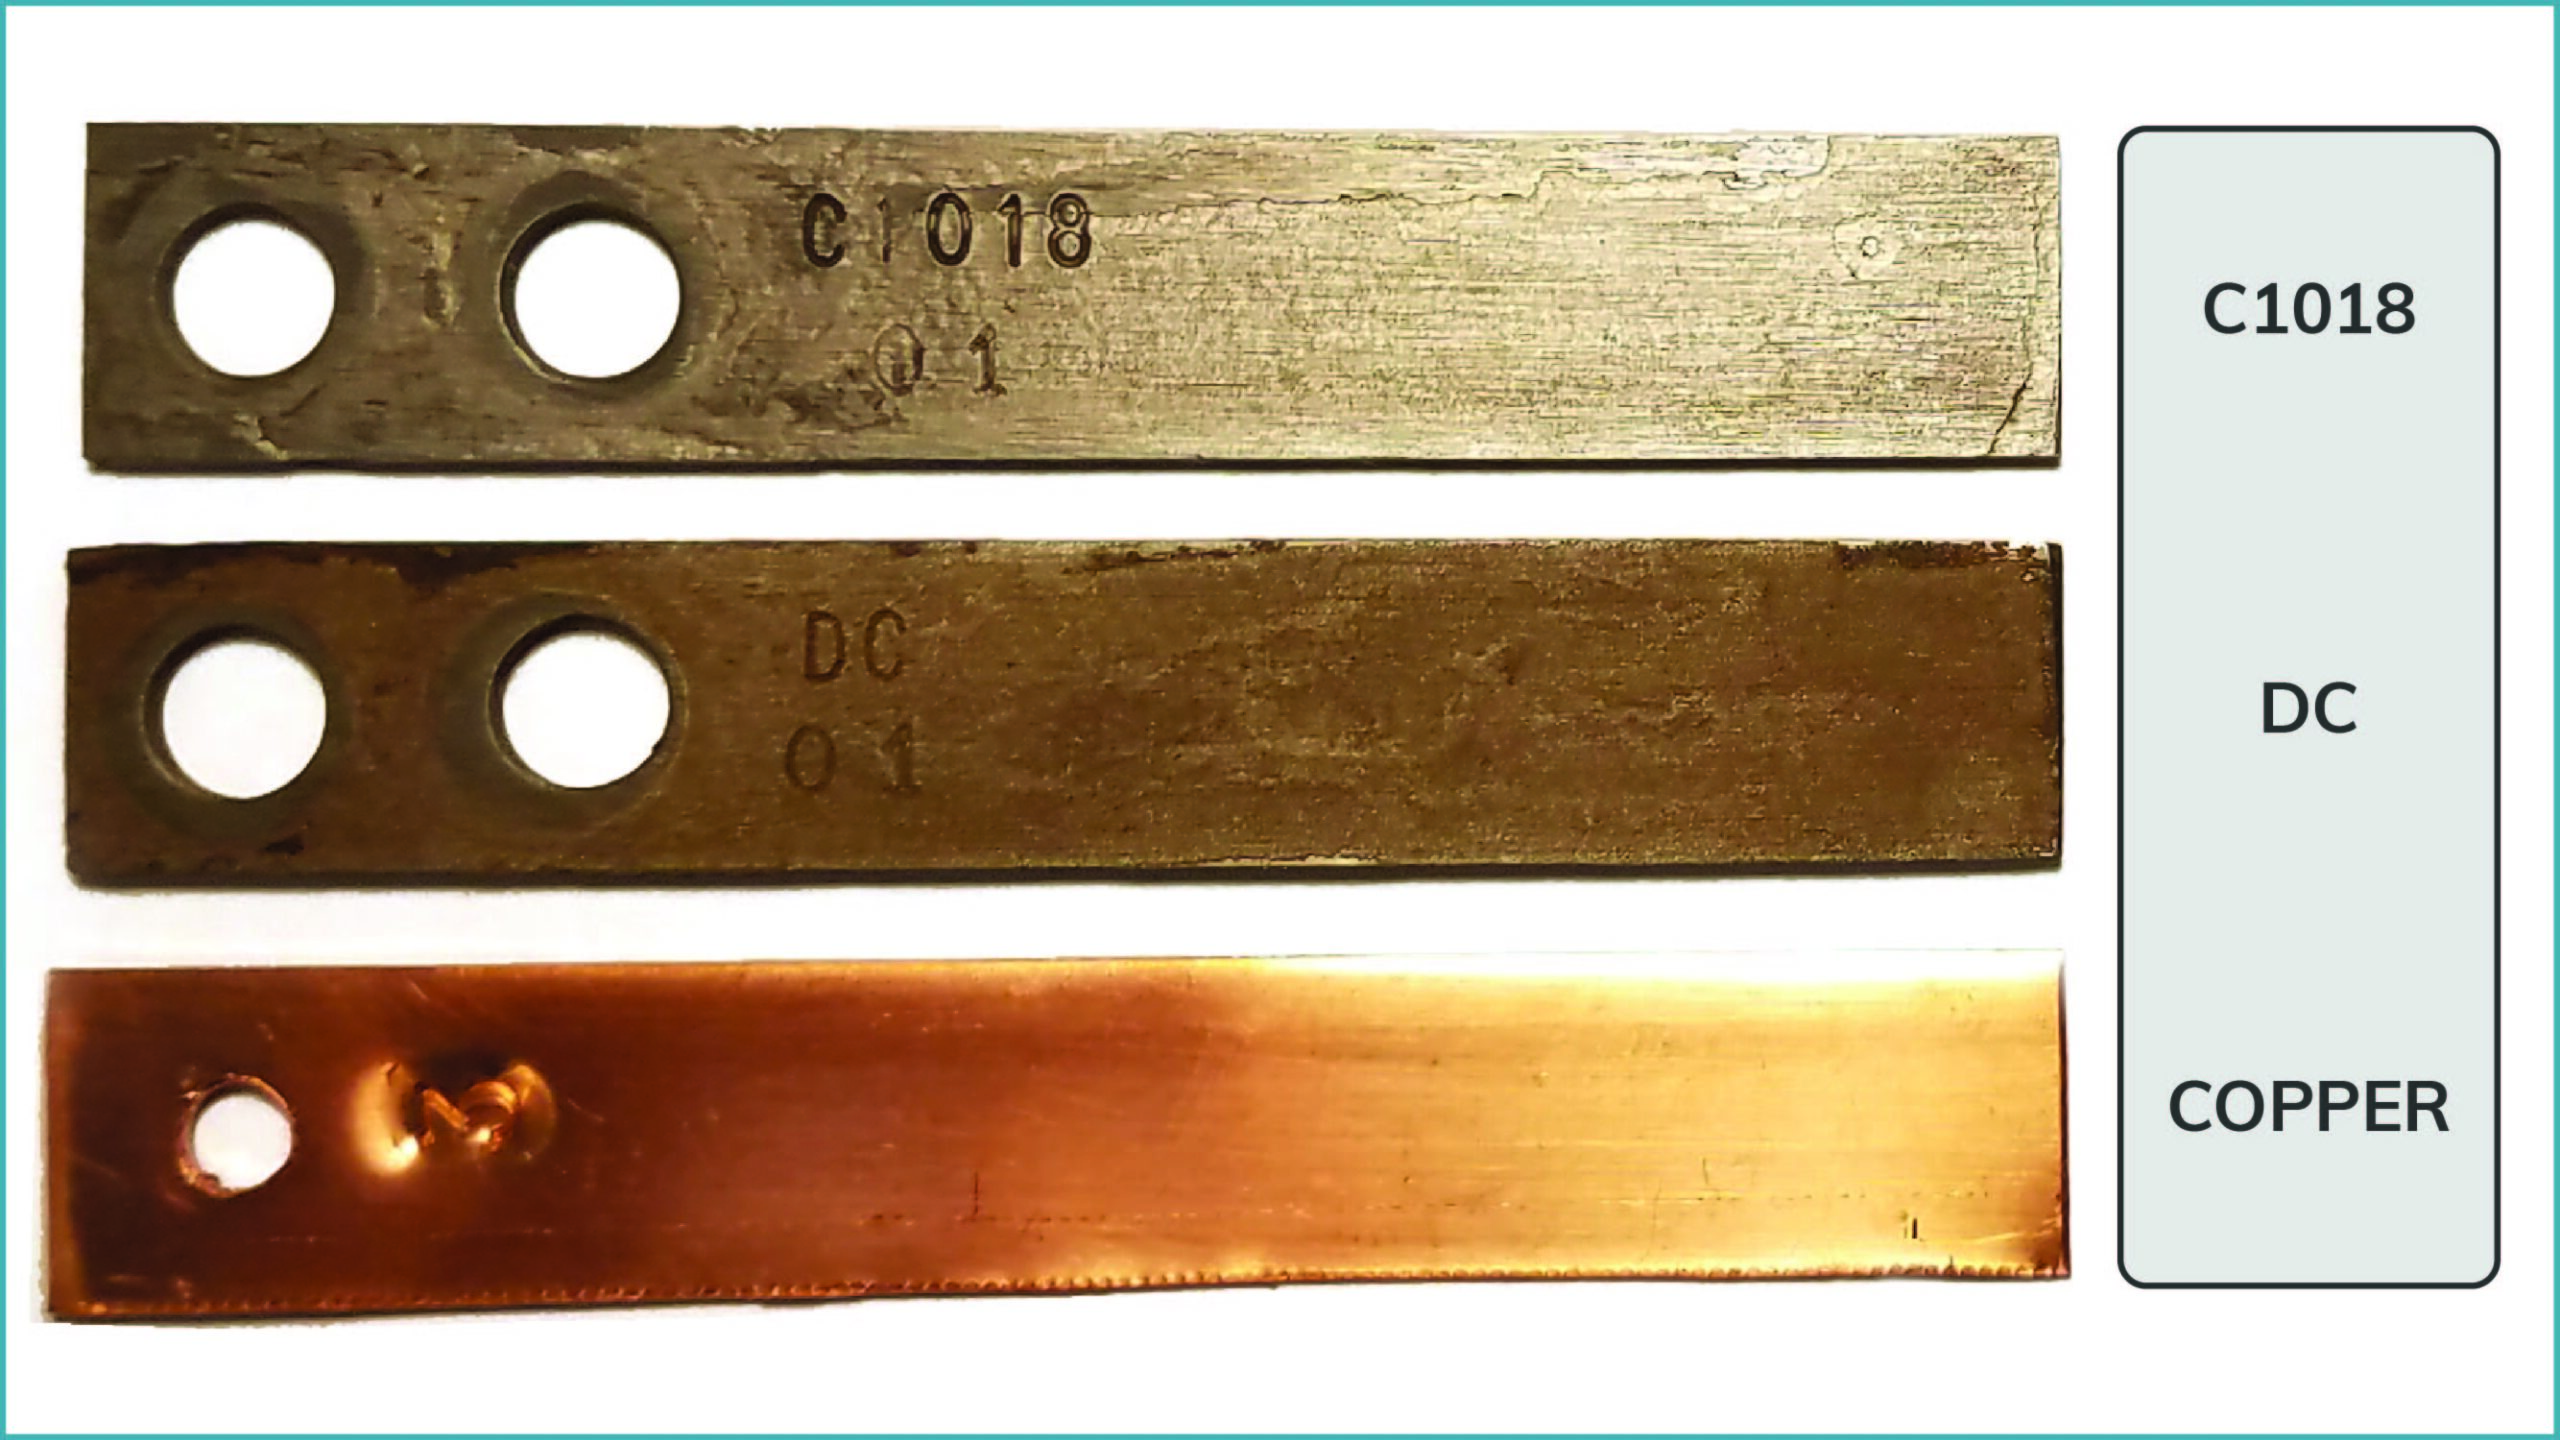 Three corrosion coupons show the effect of dissolved oxygen on metal